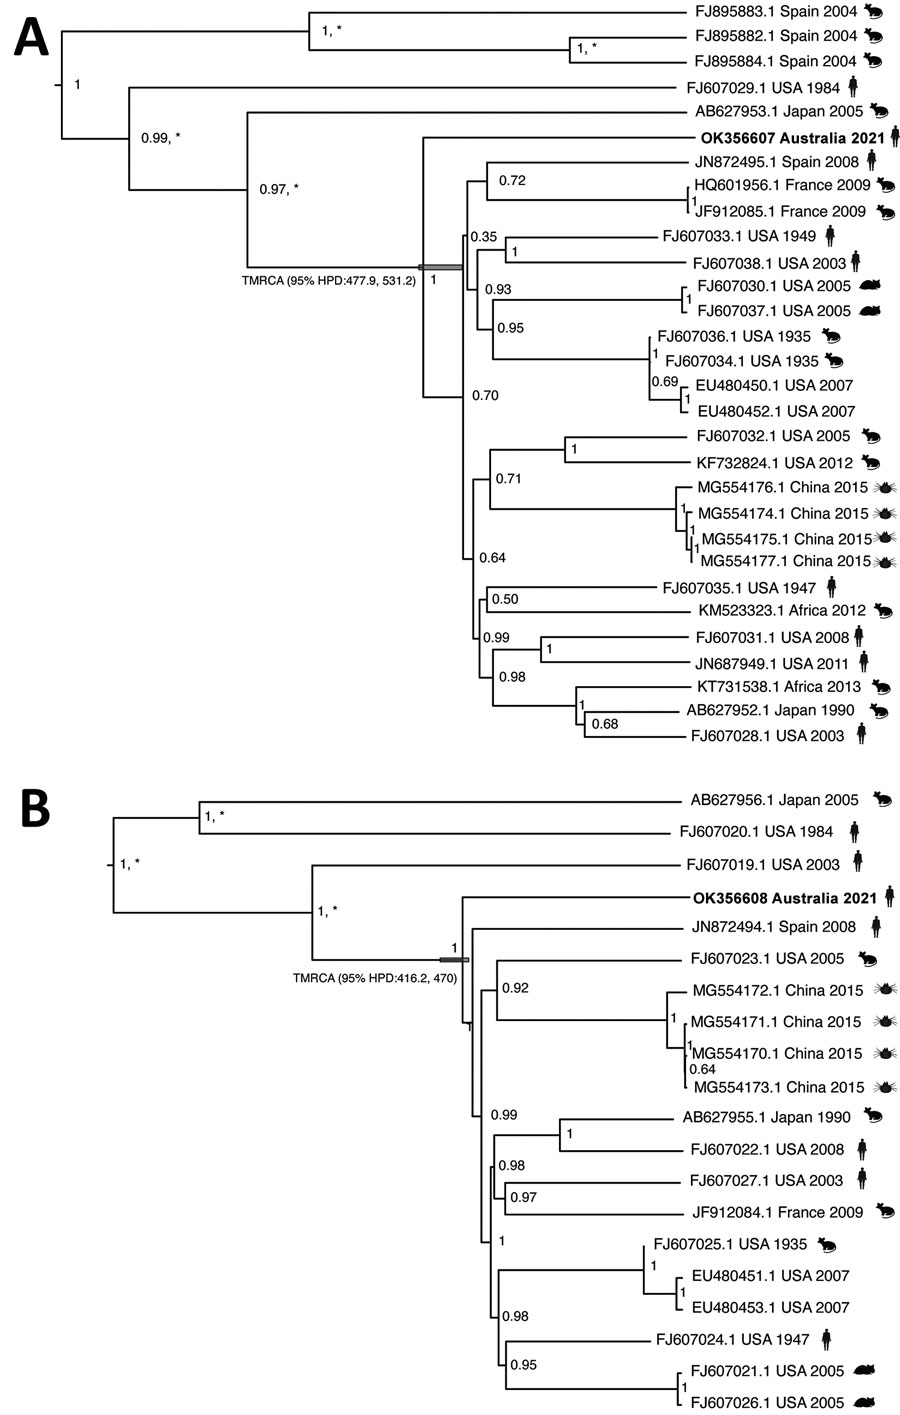 Phylogenetic relationships of a strain of lymphocytic choriomeningitis virus from a man in Australia and the broader lymphocytic choriomeningitis virus phylogeny. Tips are labeled with GenBank sequence accession number, country of origin, year of collection, and host (mice, hamsters, humans, ticks). Trees were generated by using BEAST 1.10.4 (9) to estimate the time to the most recent common ancestor between the novel virus sequence and its closest phylogenetic relative. We used the Hasegawa-Kishino-Yano plus gamma substitution model with a strict clock and an exponential growth coalescent tree prior. Because the dataset exhibits high sequence divergence, we calibrated the molecular clock by using previous independent estimates of the substitution rate, with a fixed clock rate for the long segment of 3.7 × 10–4 substitutions/site/year and 3.3 × 10–4 substitutions/site/year for the short segment (10). Highest clade credibility tree of the short segment (GenBank accession no. OK356607) sequences (n = 29) (A) and highest clade credibility tree of the long segment (GenBank accession no. OK356608) sequences (n = 19) (B). Node labels denote the posterior support, and an asterisk represents a bootstrap percentage of >70% support for a specific clade, using 1,000 ultra-fast bootstrap replicates in a maximum-likelihood tree approach using IQ-TREE2 (11). The 95% highest posterior density for the divergence time before present of the Australia sample is annotated in the respective node.